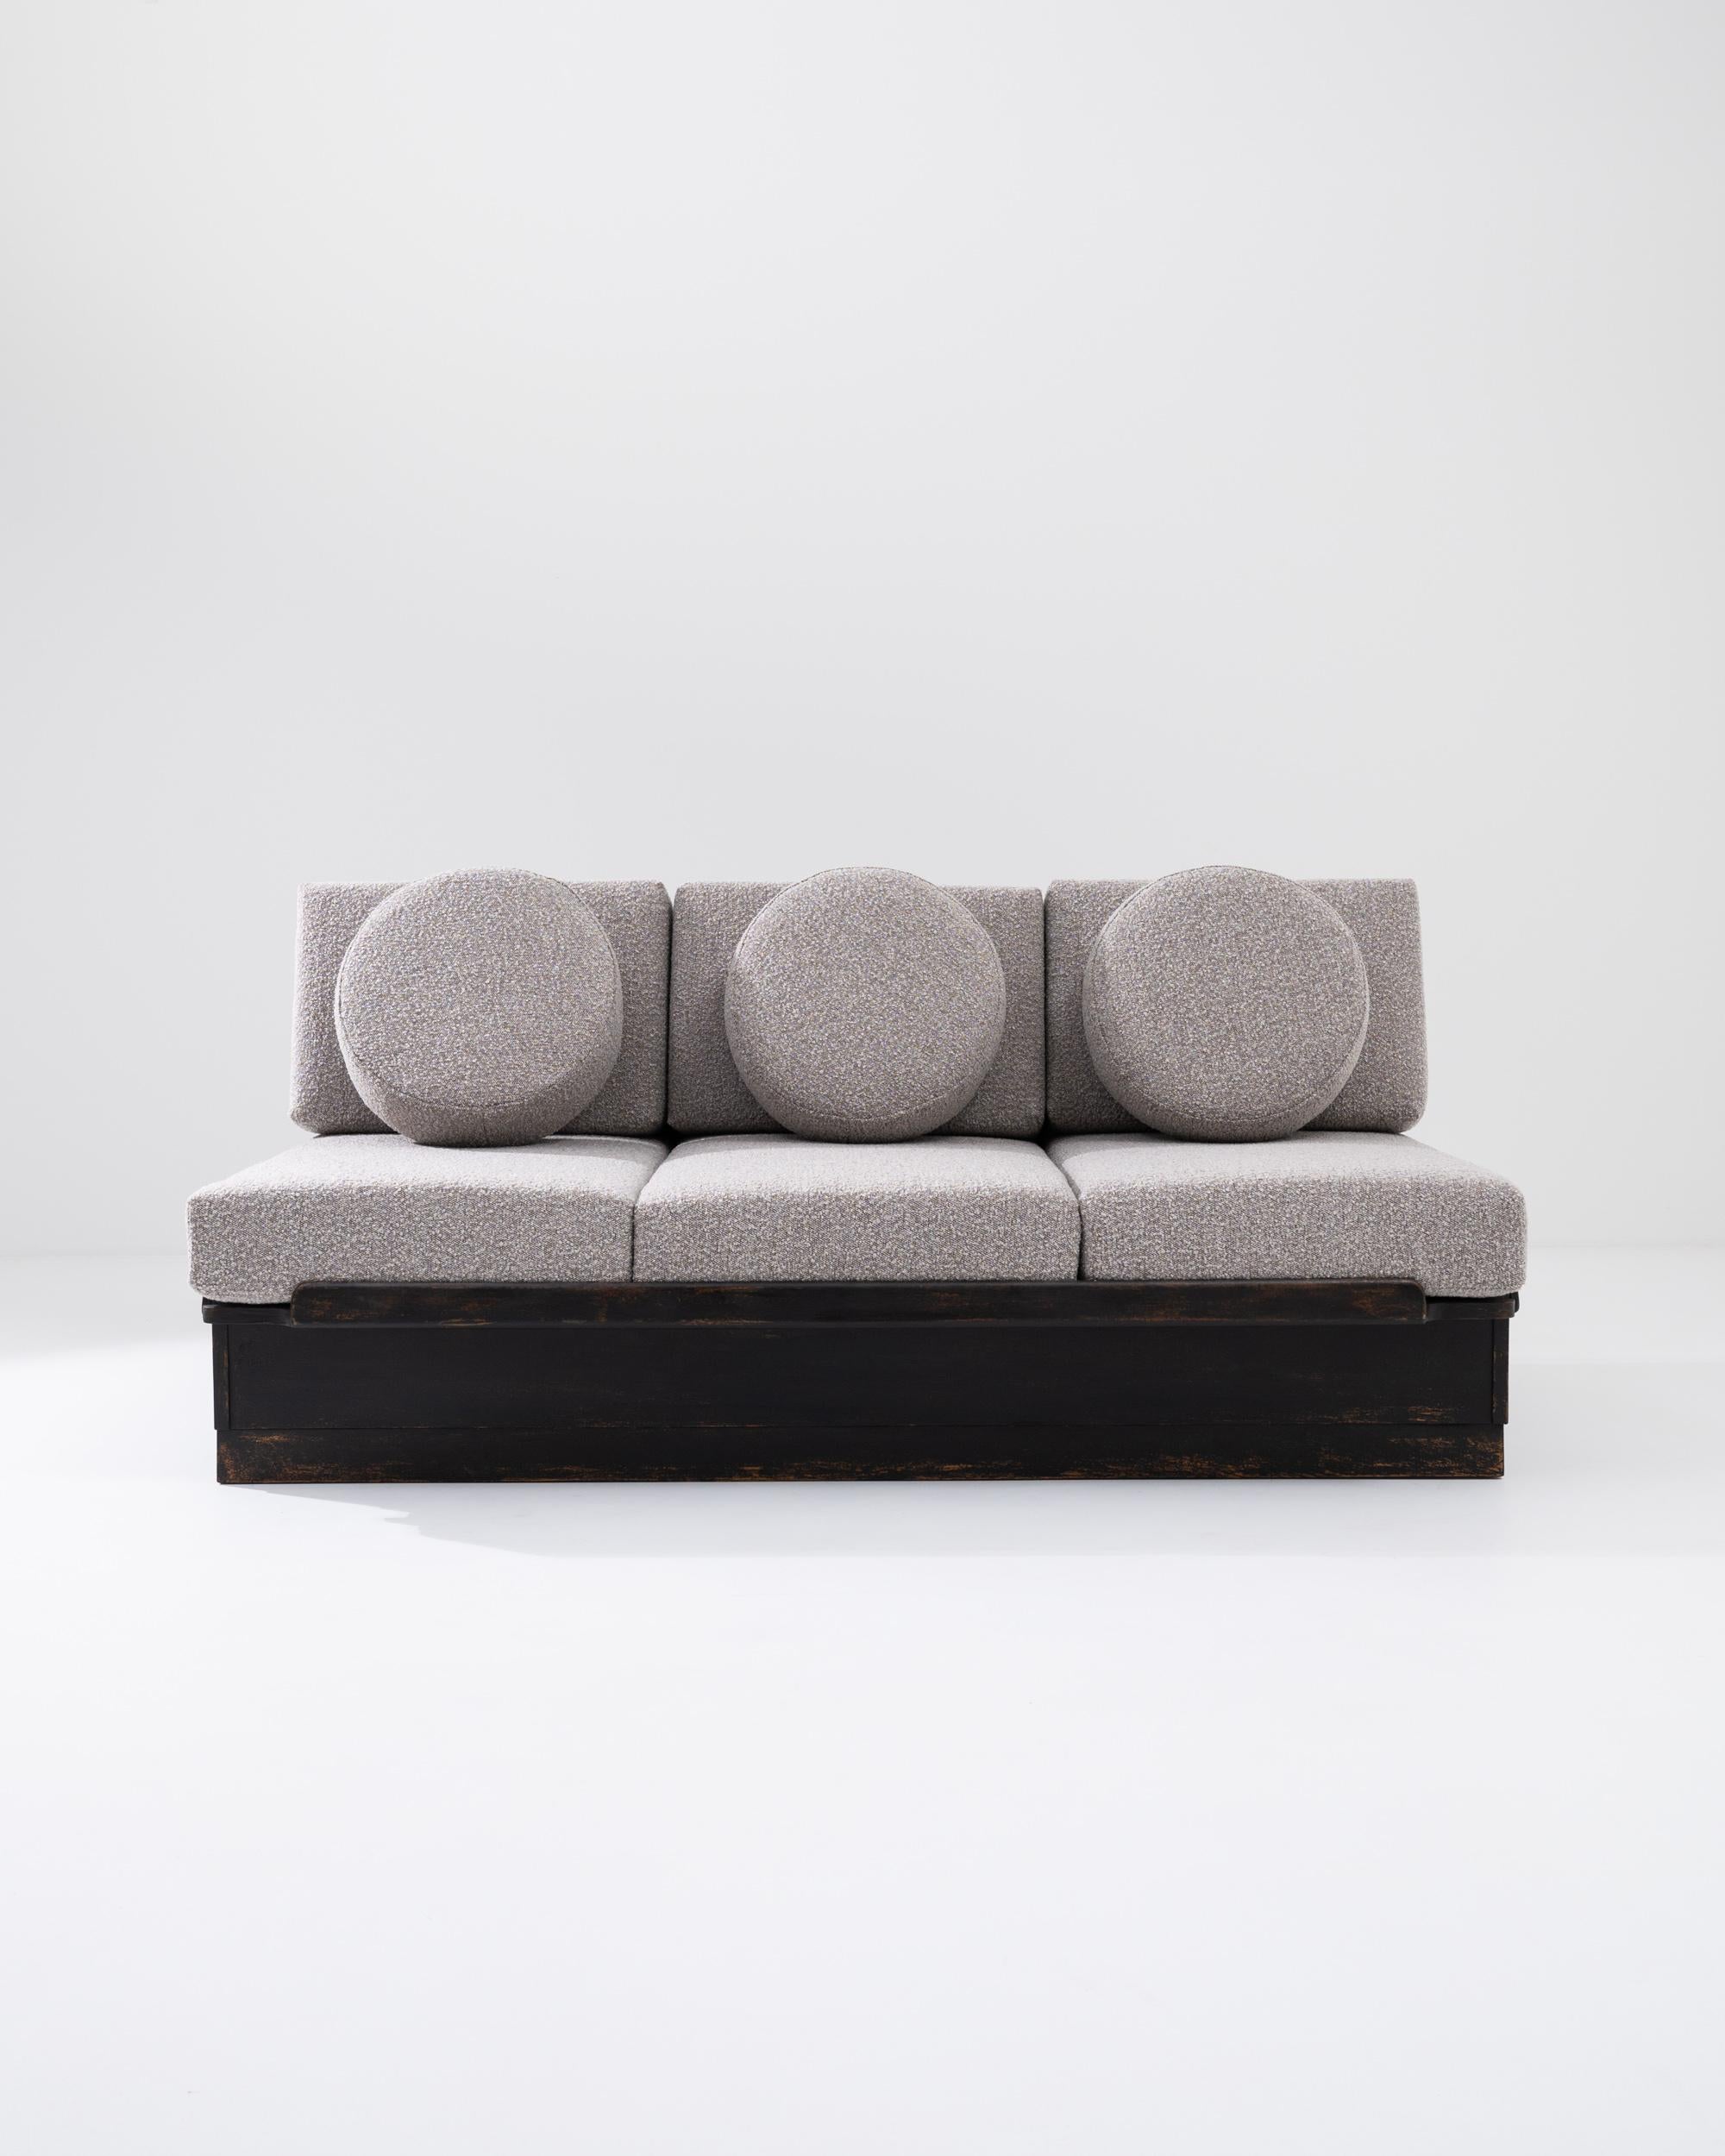 This vintage sofa-bed offers a show-stopping, chic Modernist centerpiece. Made in Central Europe in the 20th century, the straight lines and clean corners of the wooden base are continued in the square cushions of the seat; round pillows add a